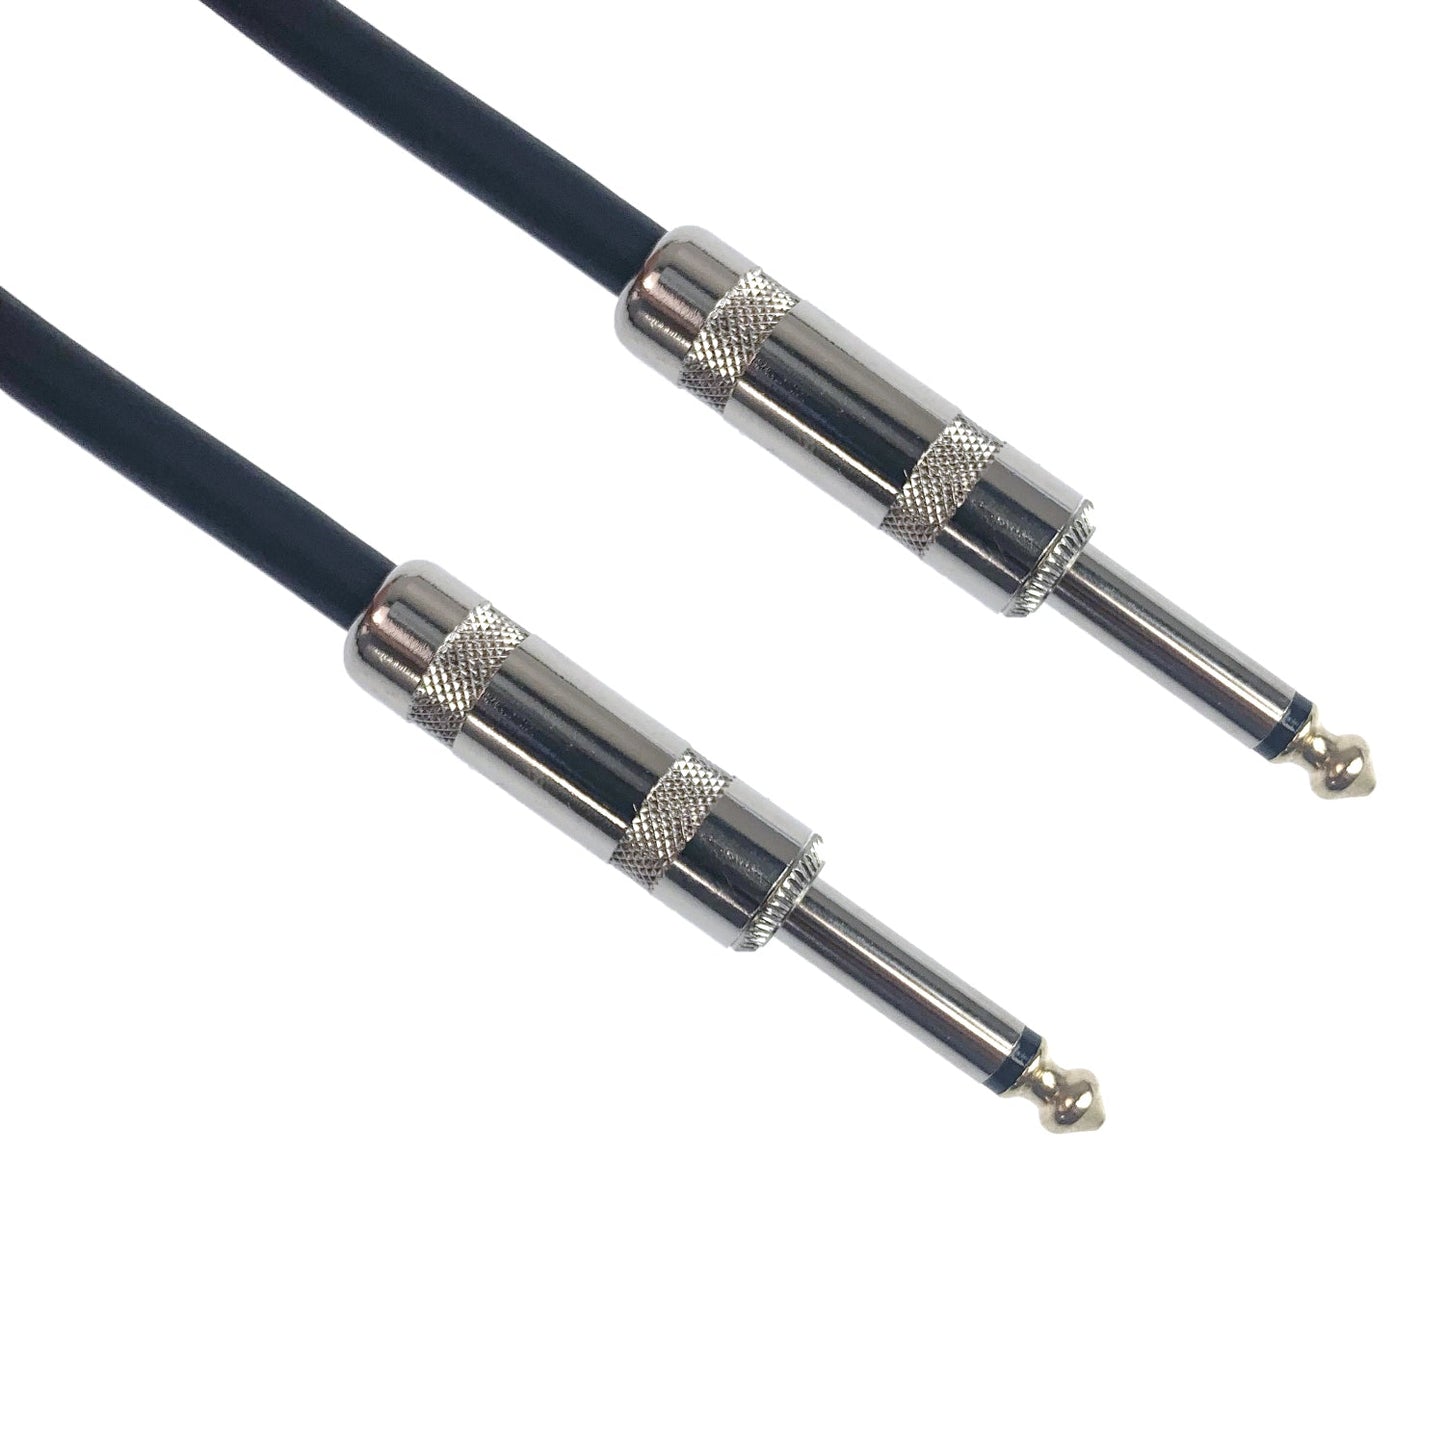 ACL Jack 6.35mm TS 1/4 Inch to 1/4 Inch Jack Audio Guitar Instrument Patch Cable for E-Piano Saxophone Bass Keyboard 6 Meters